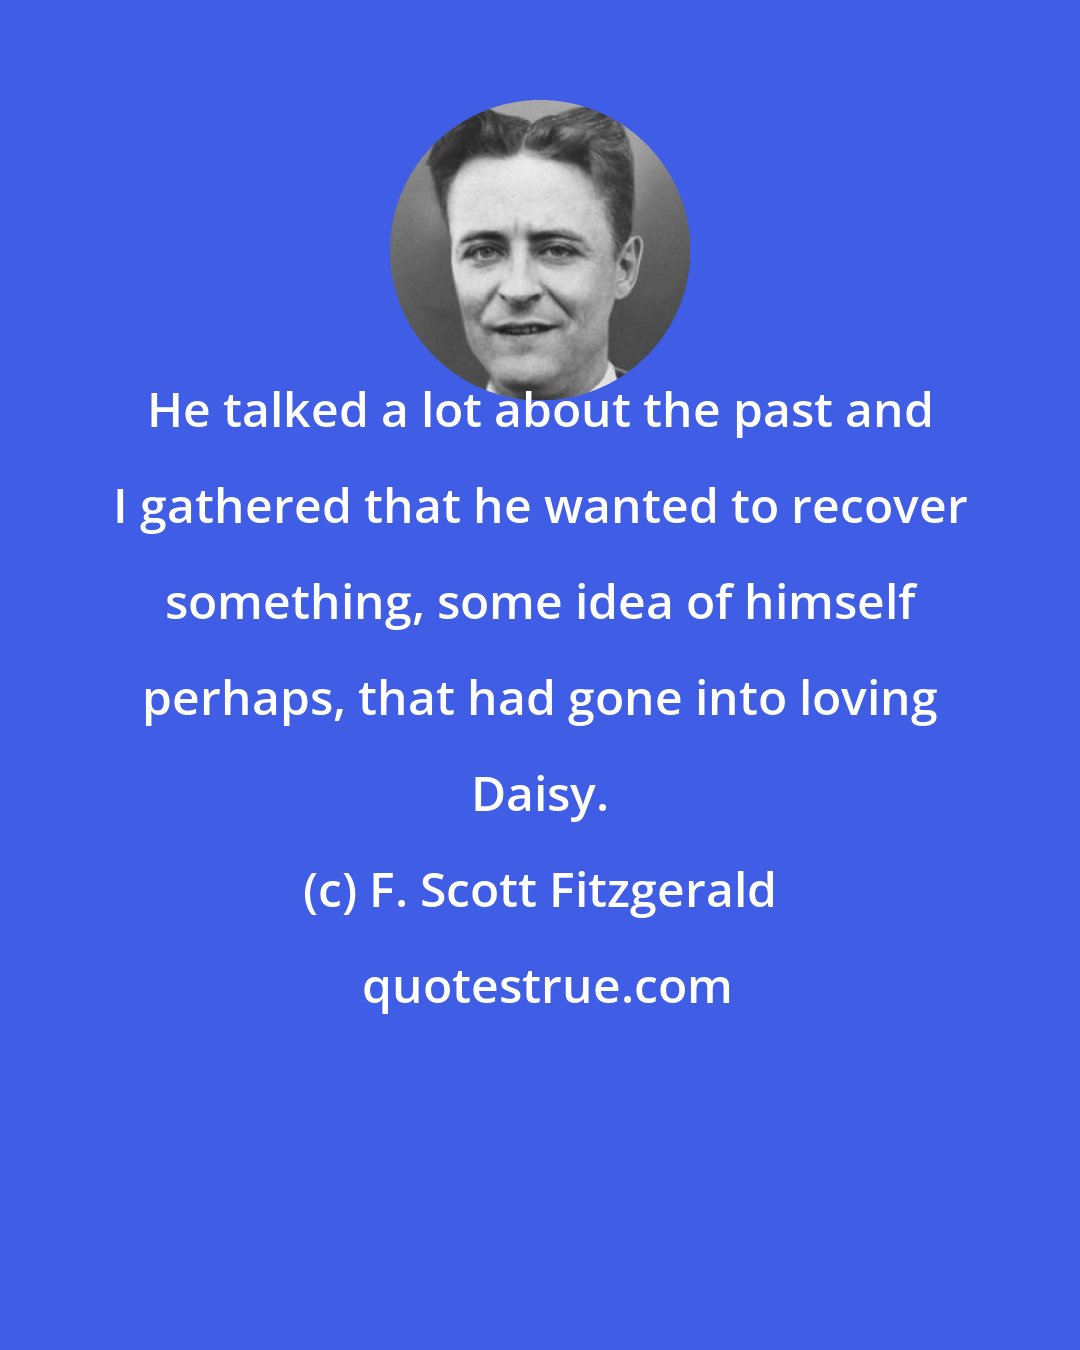 F. Scott Fitzgerald: He talked a lot about the past and I gathered that he wanted to recover something, some idea of himself perhaps, that had gone into loving Daisy.